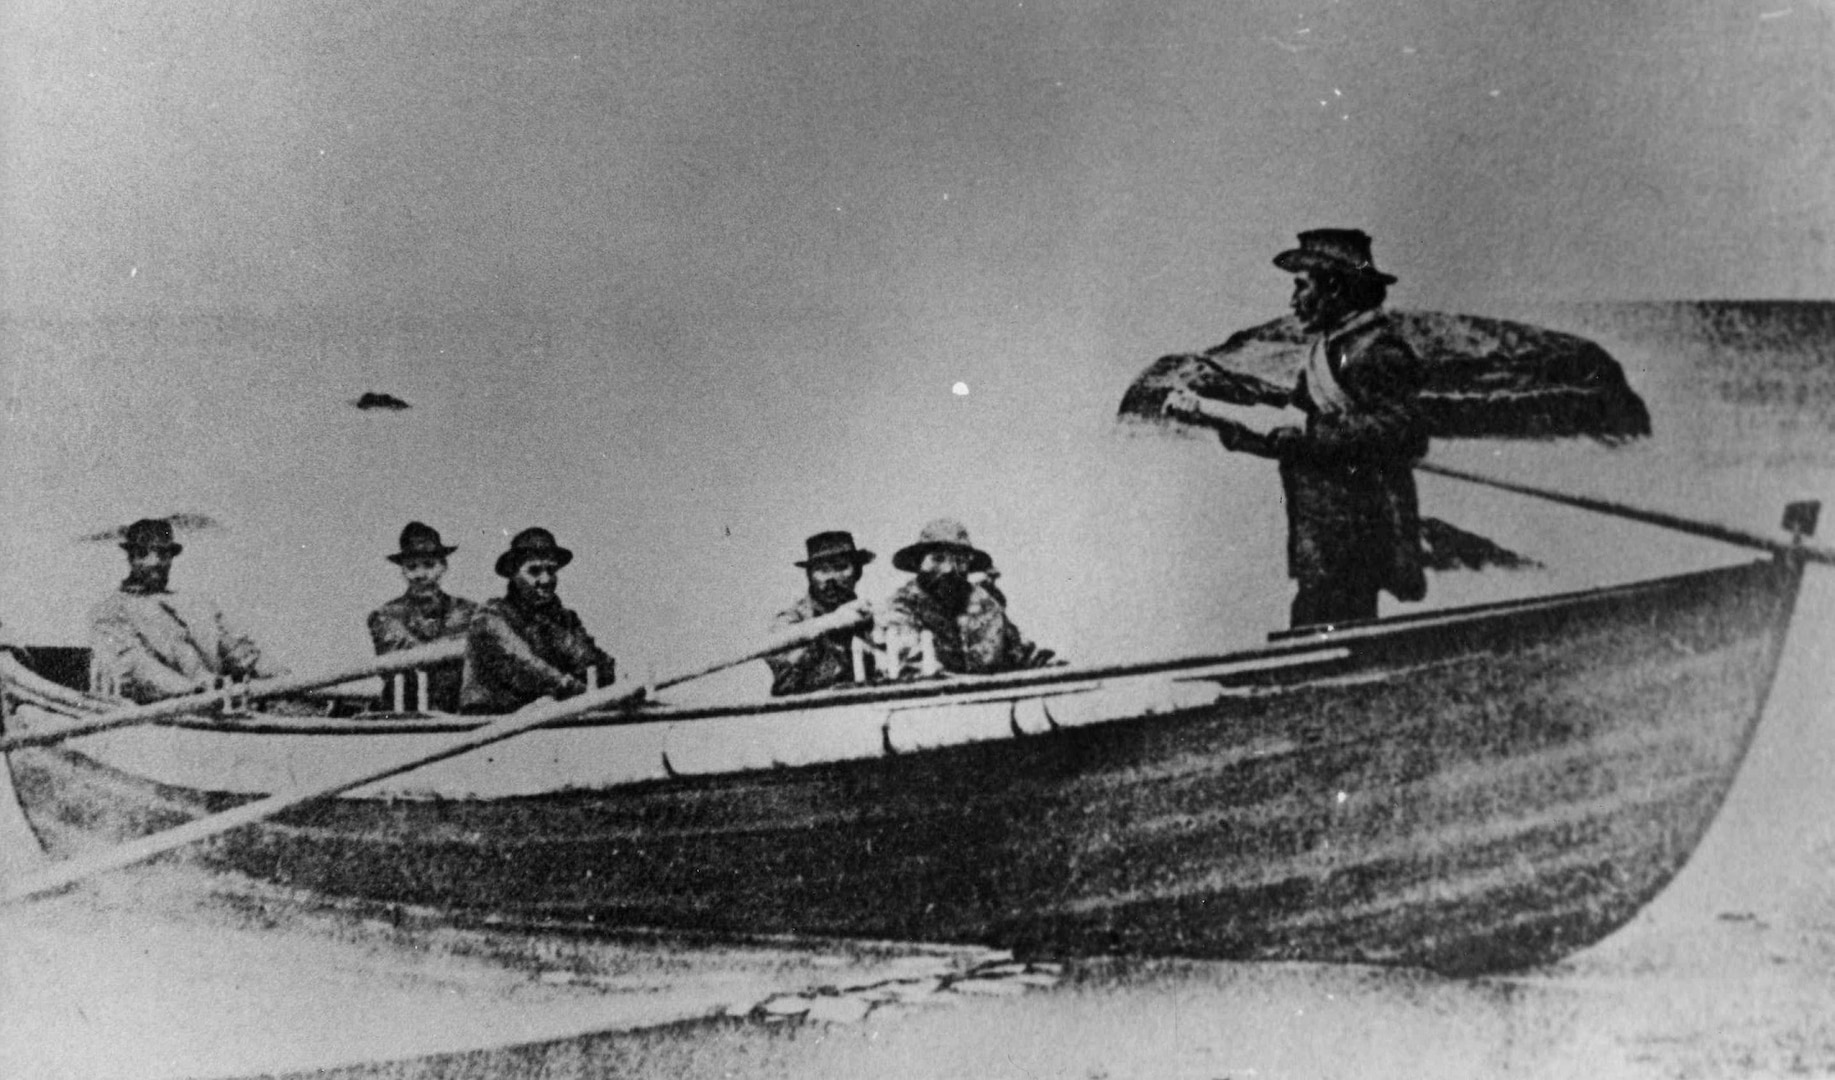 First boat used by Aquinnah Wampanoag rescuers, photographed after the event. Samuel Anthony is seated third from right. (Courtesy of the Martha’s Vineyard Museum)